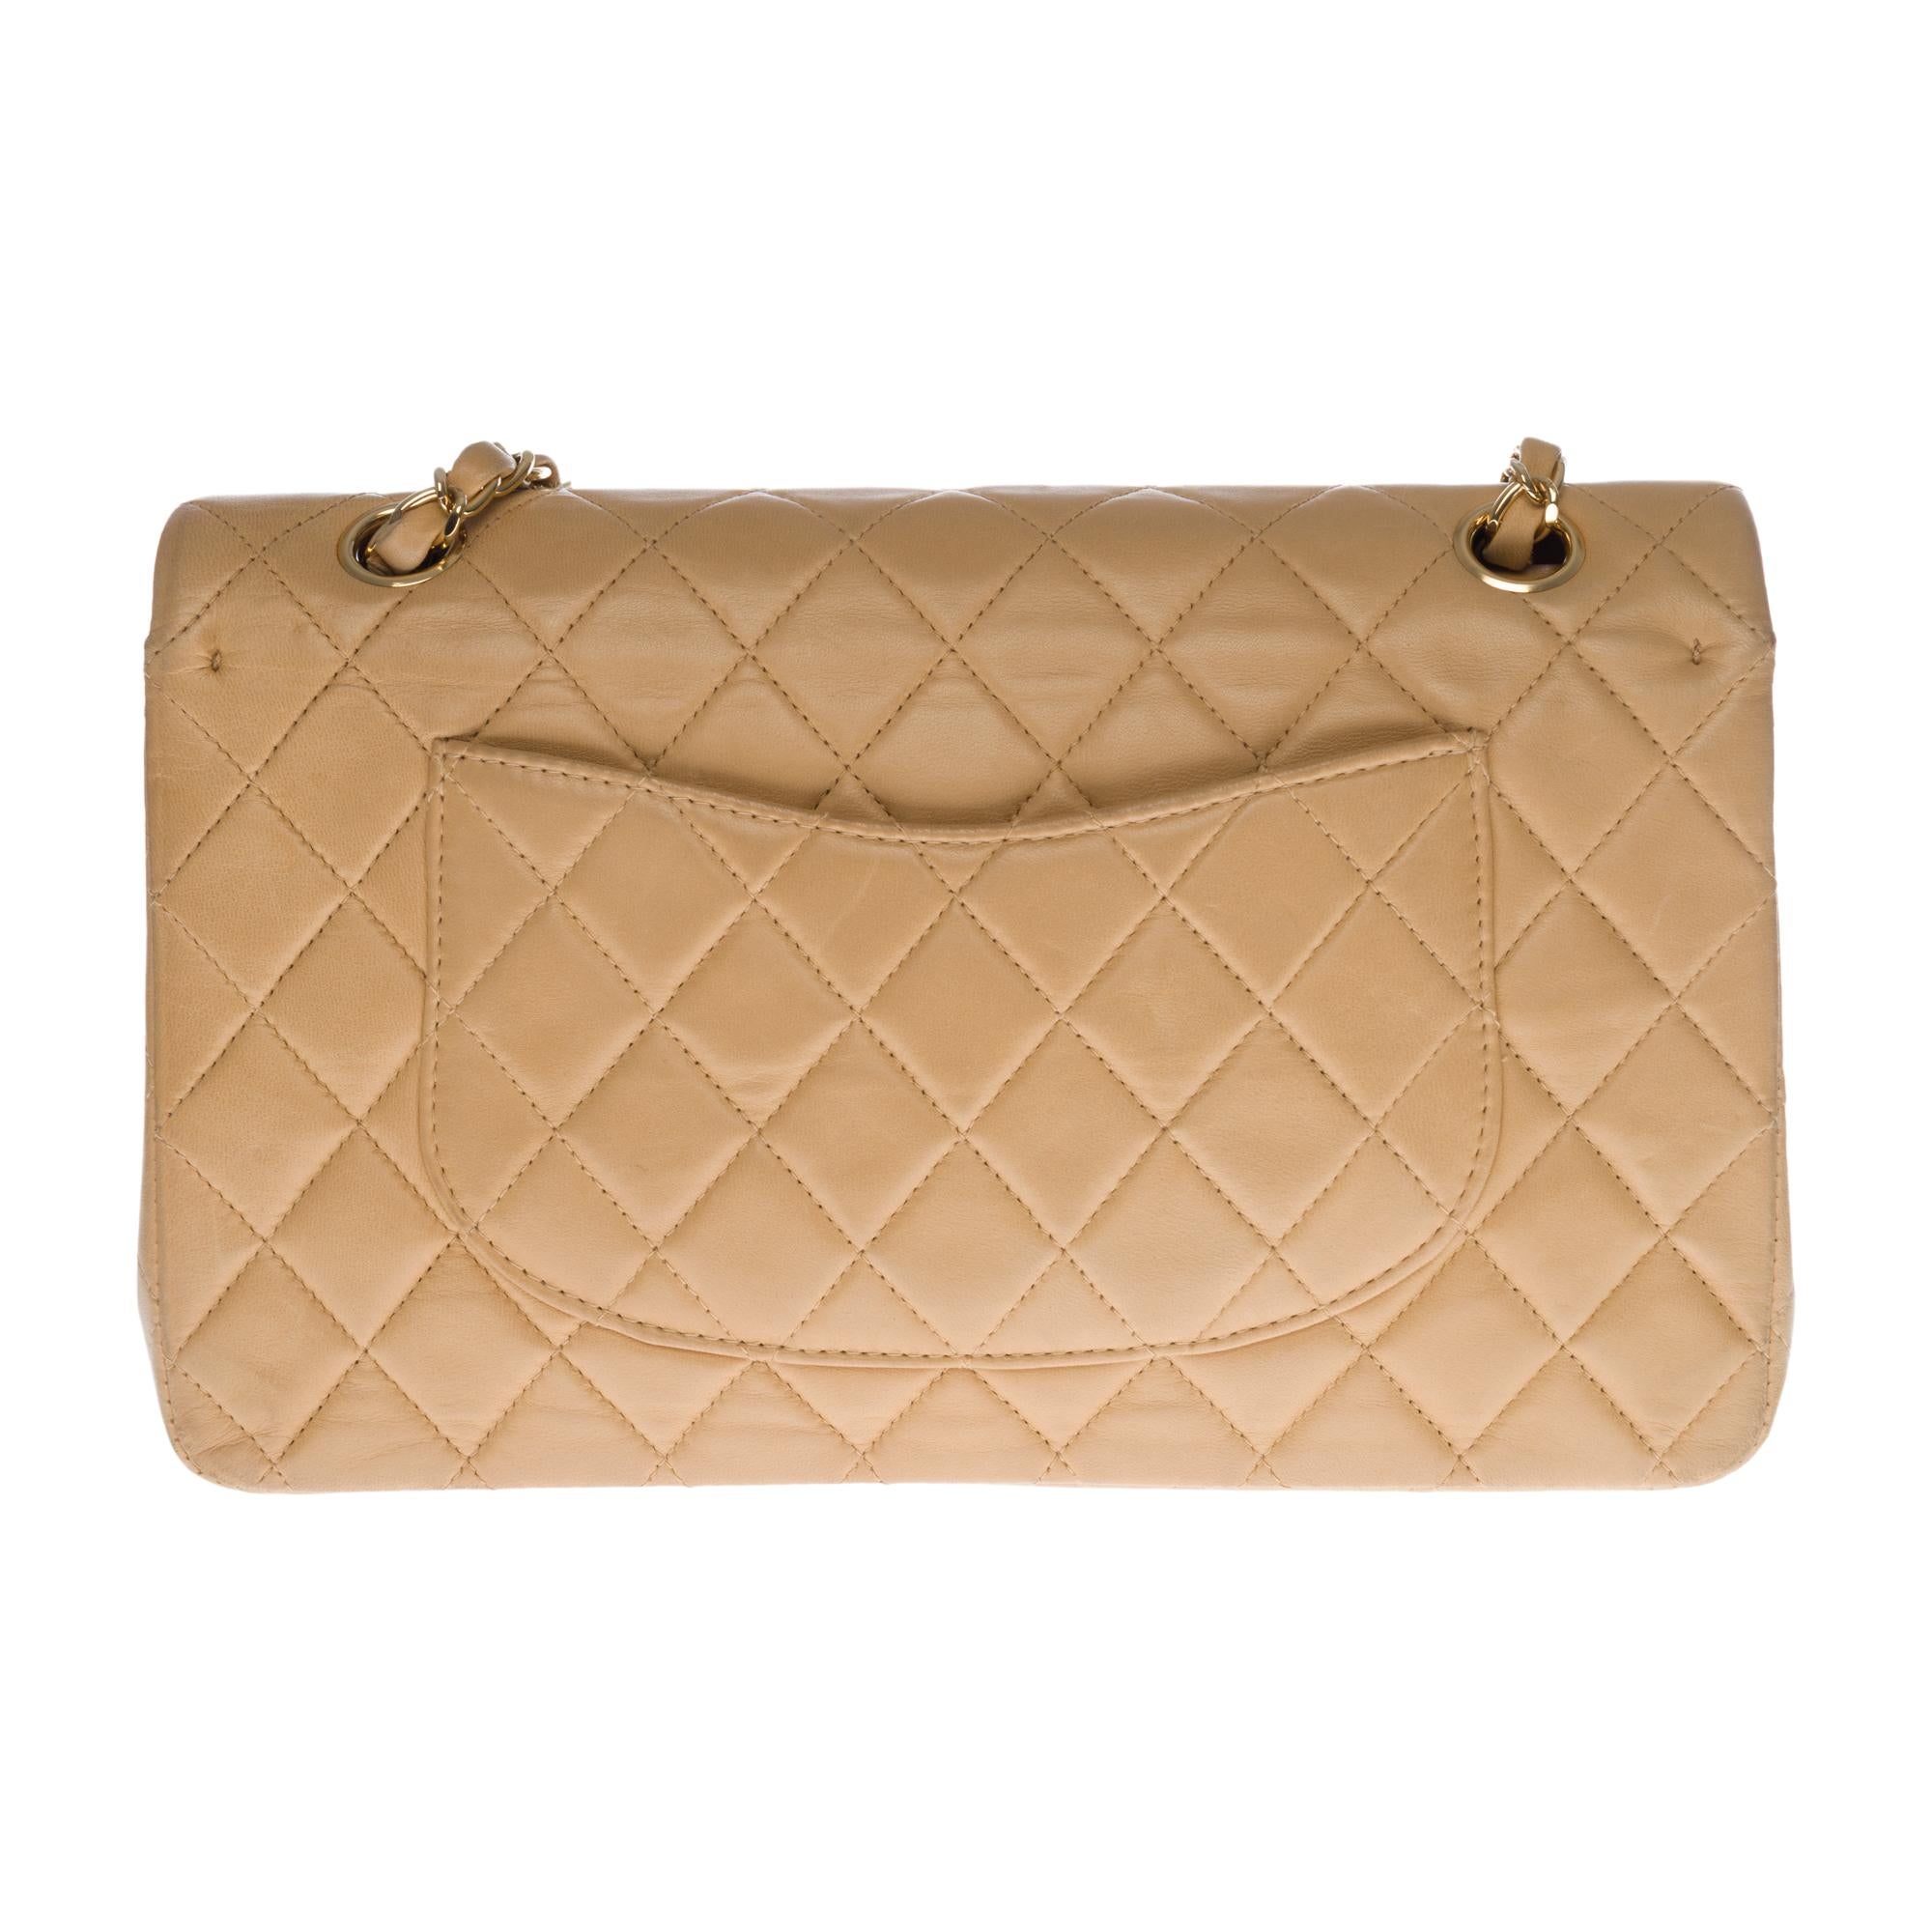 Beautiful Chanel Timeless/Classique handbag with double flap in beige quilted lambskin leather, gold-tone metal hardware, a golden metal chain handle intertwined with beige leather allowing a hand, shoulder and shoulder strap
Closure with gold metal